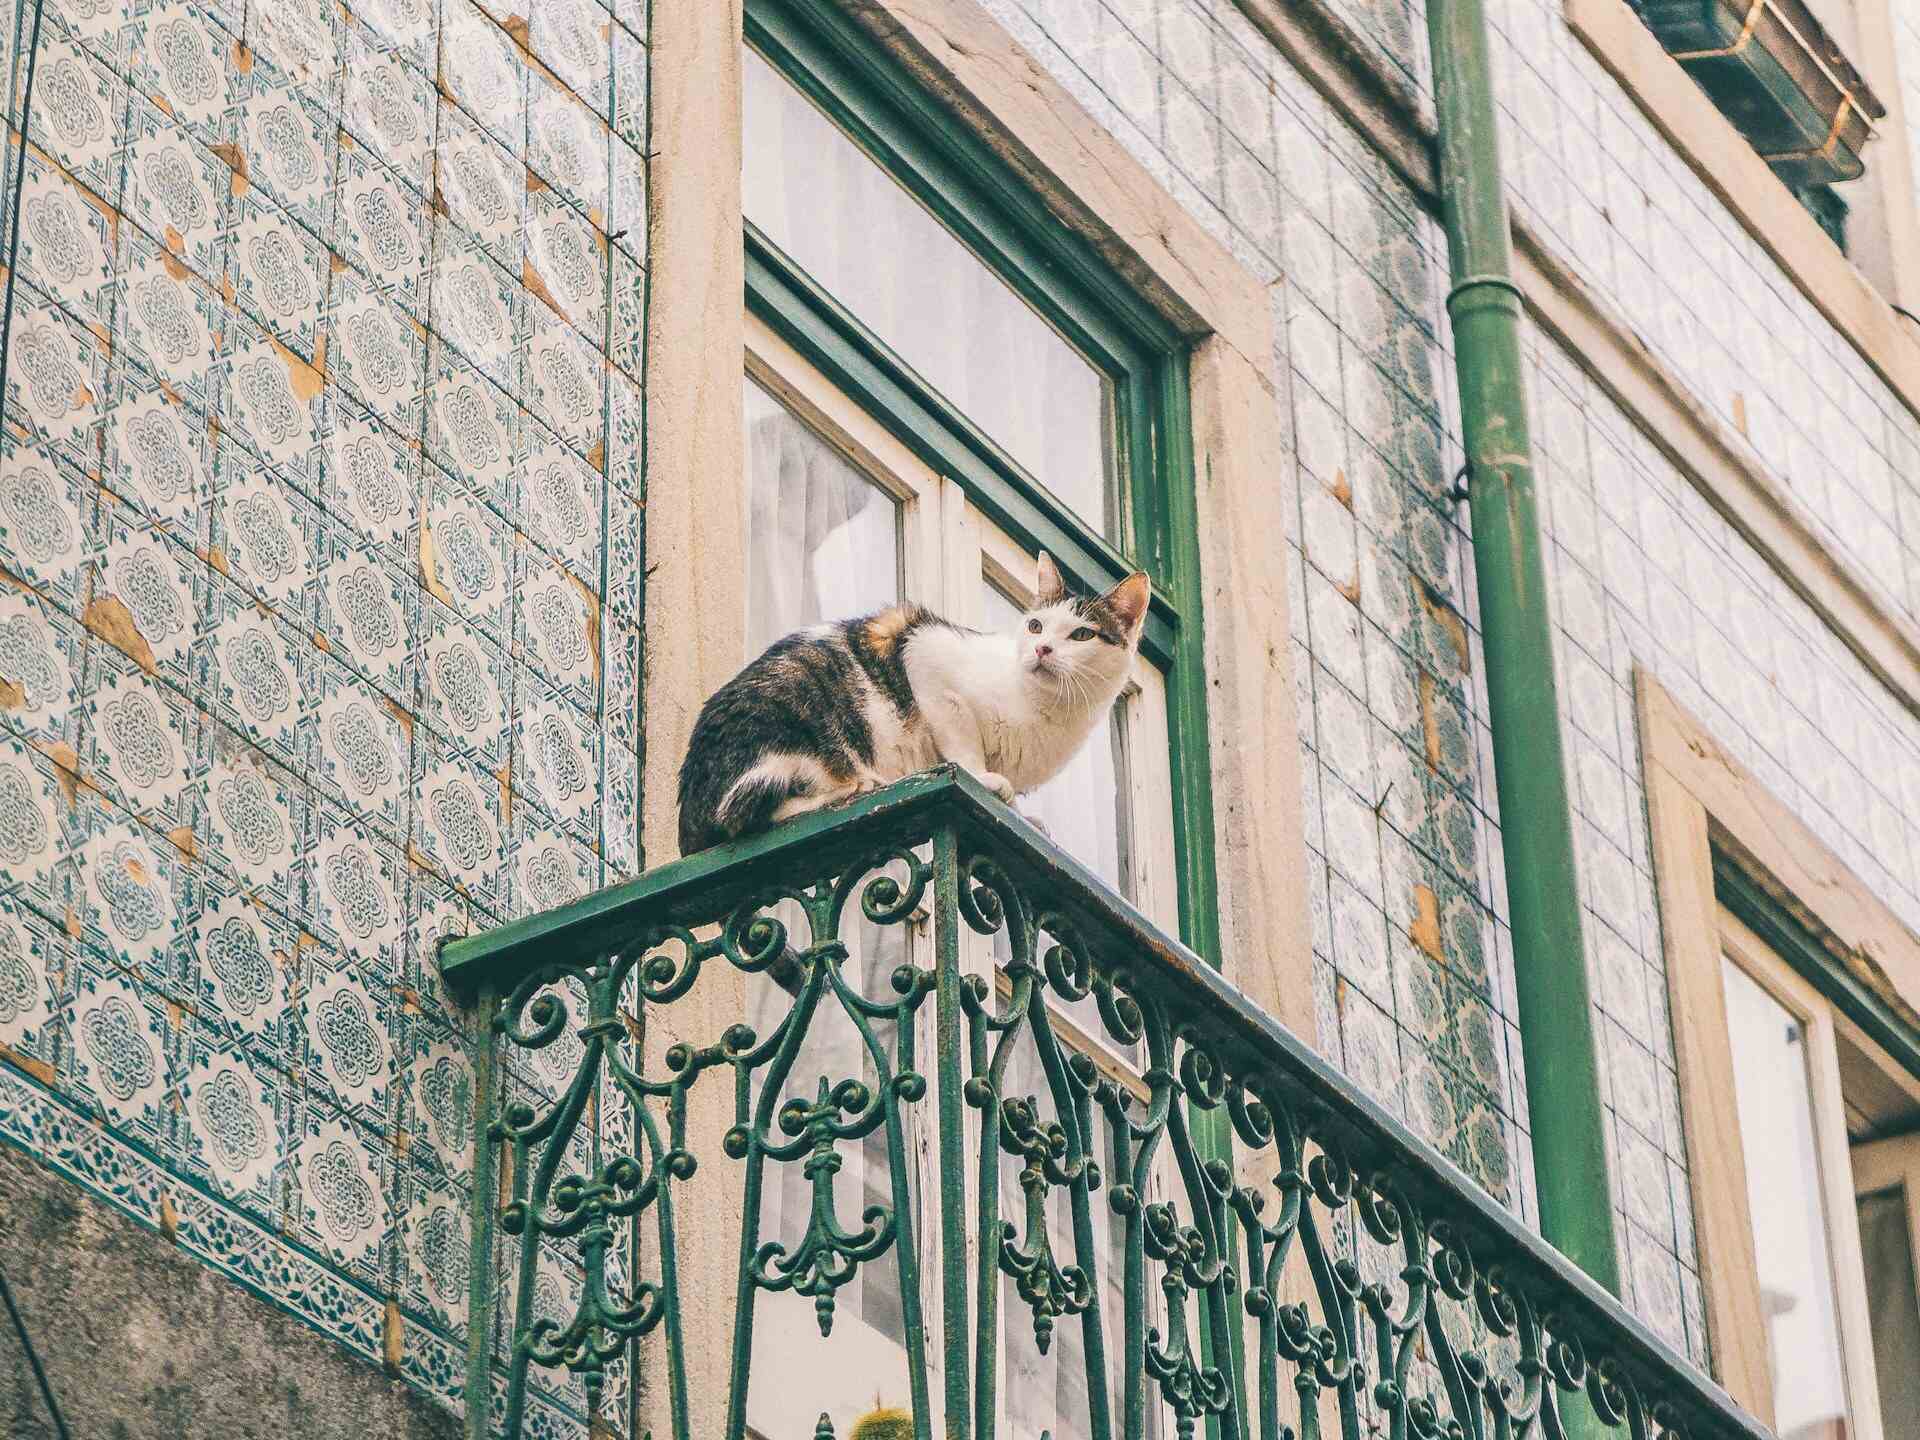 A cat perched on a green balcony railing